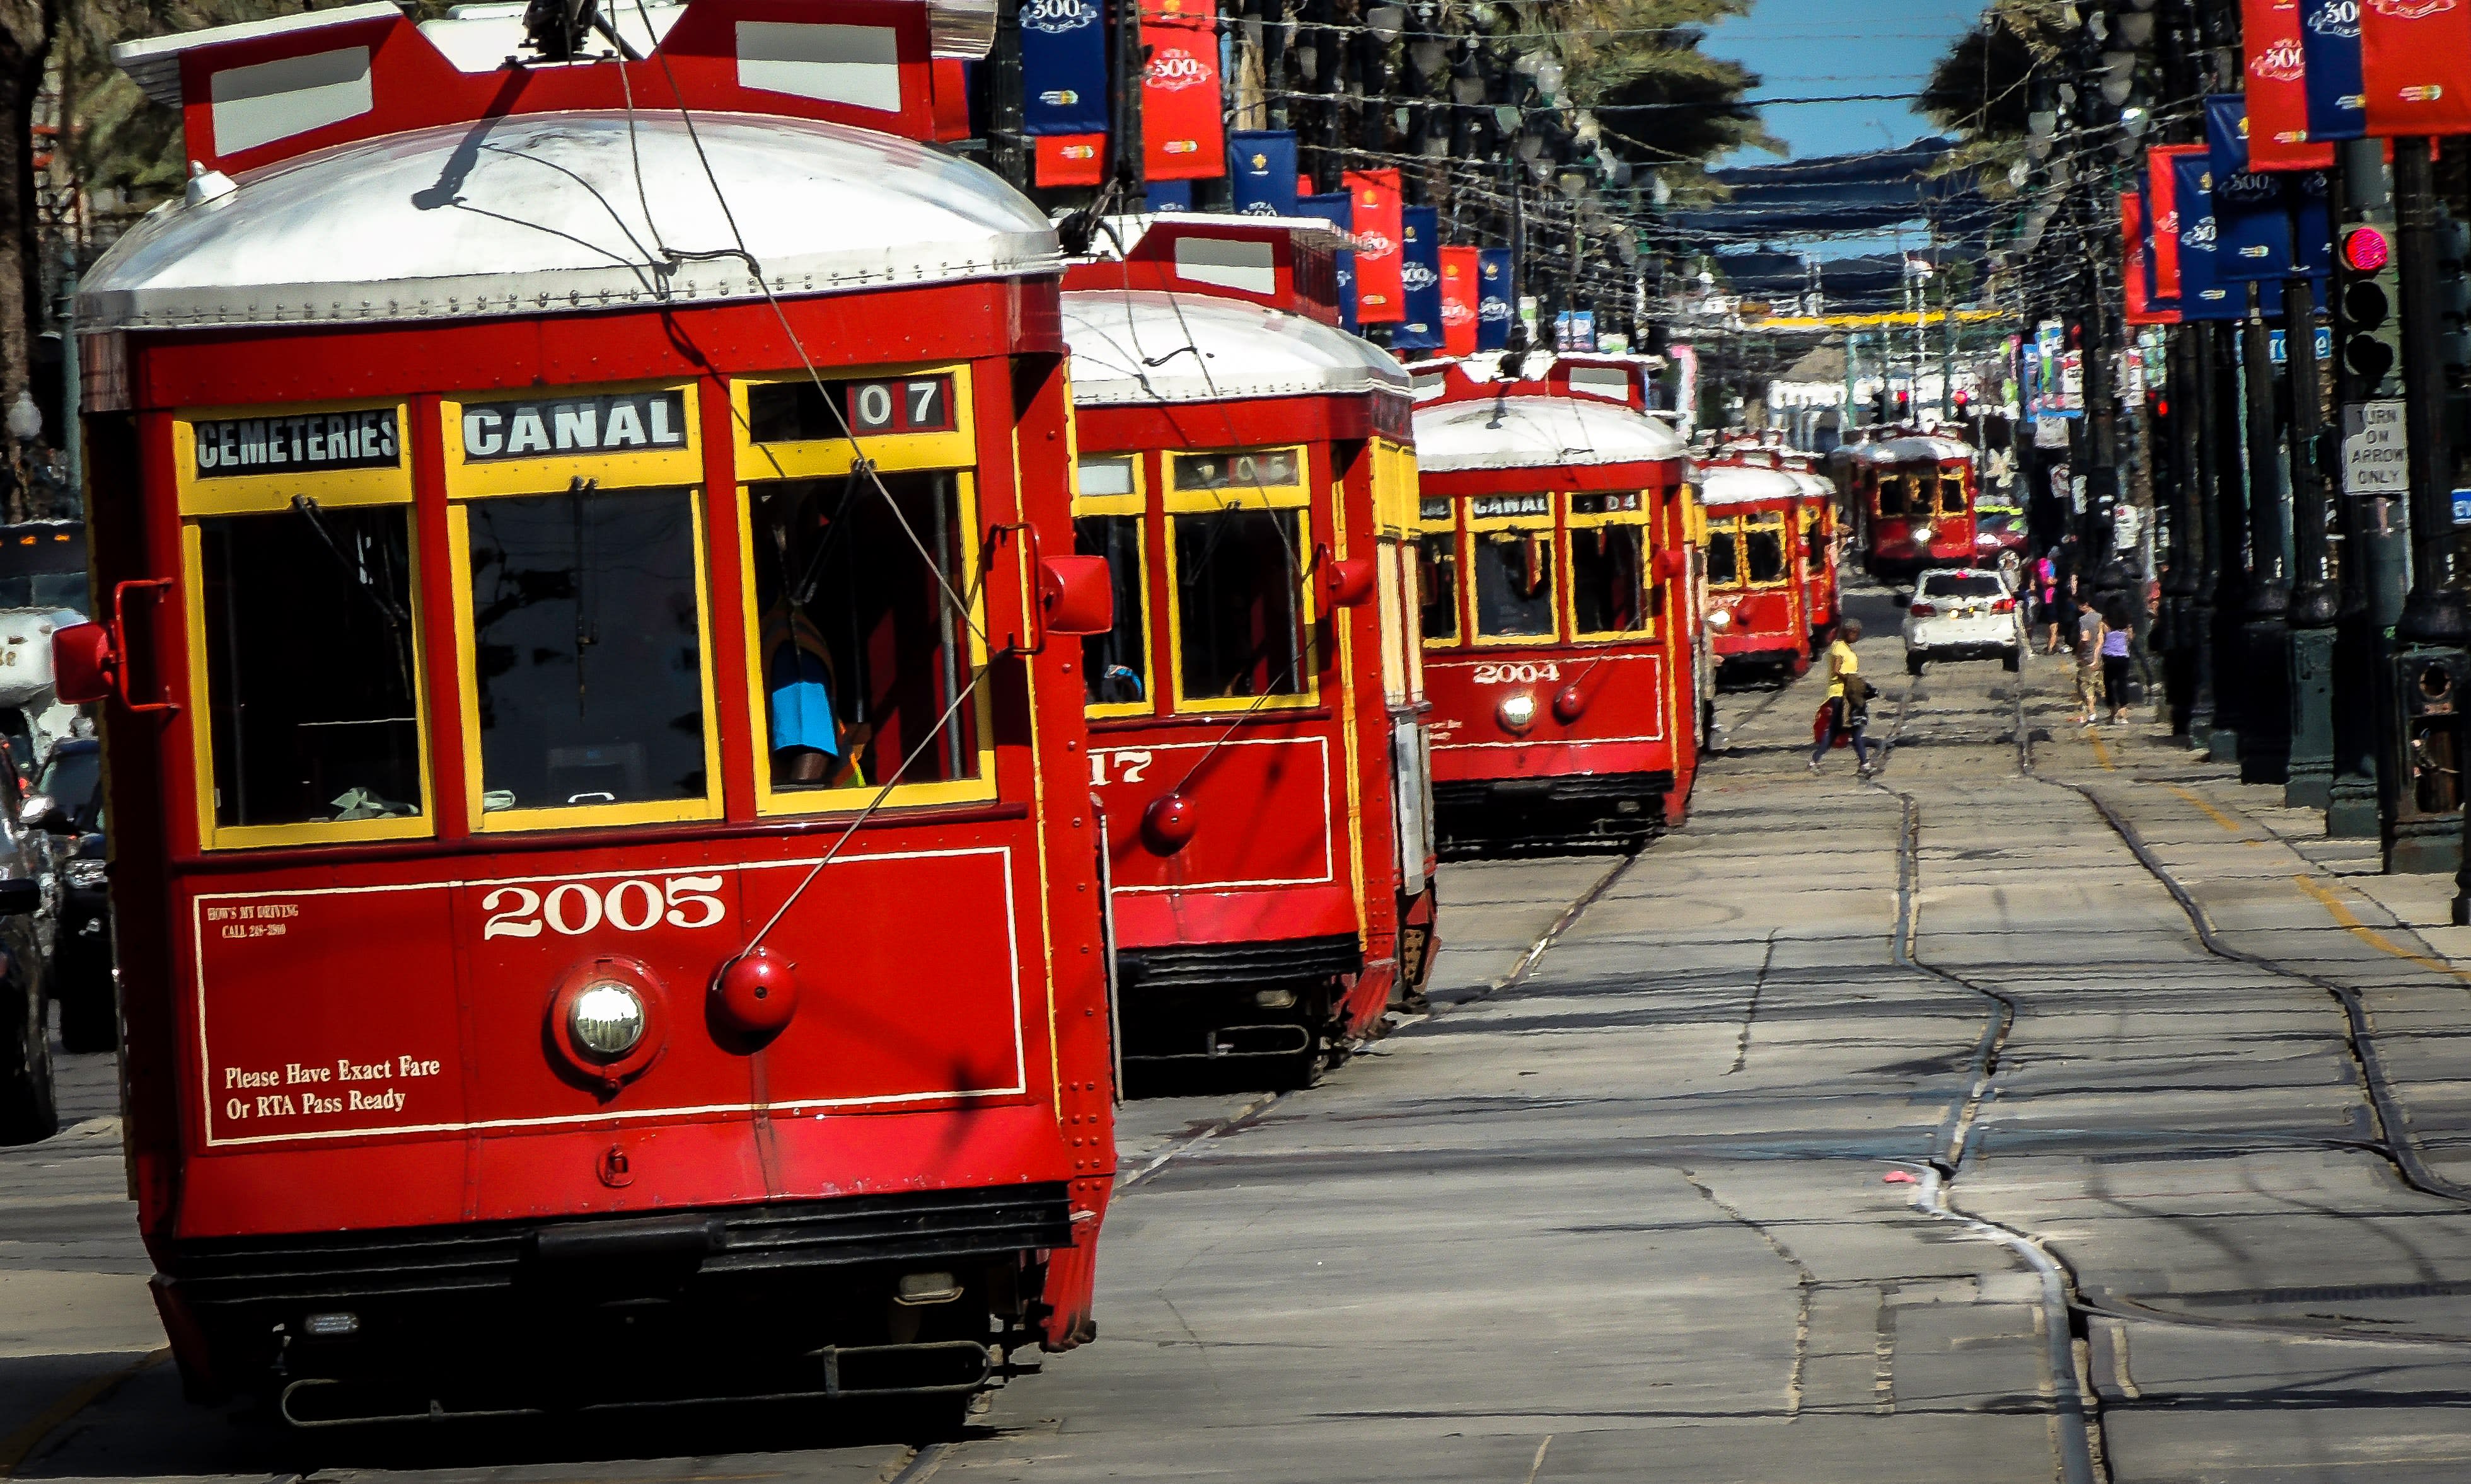 Image of Cable Car, Vehicle, Streetcar, Car, Traffic Light, Person, Bus, 